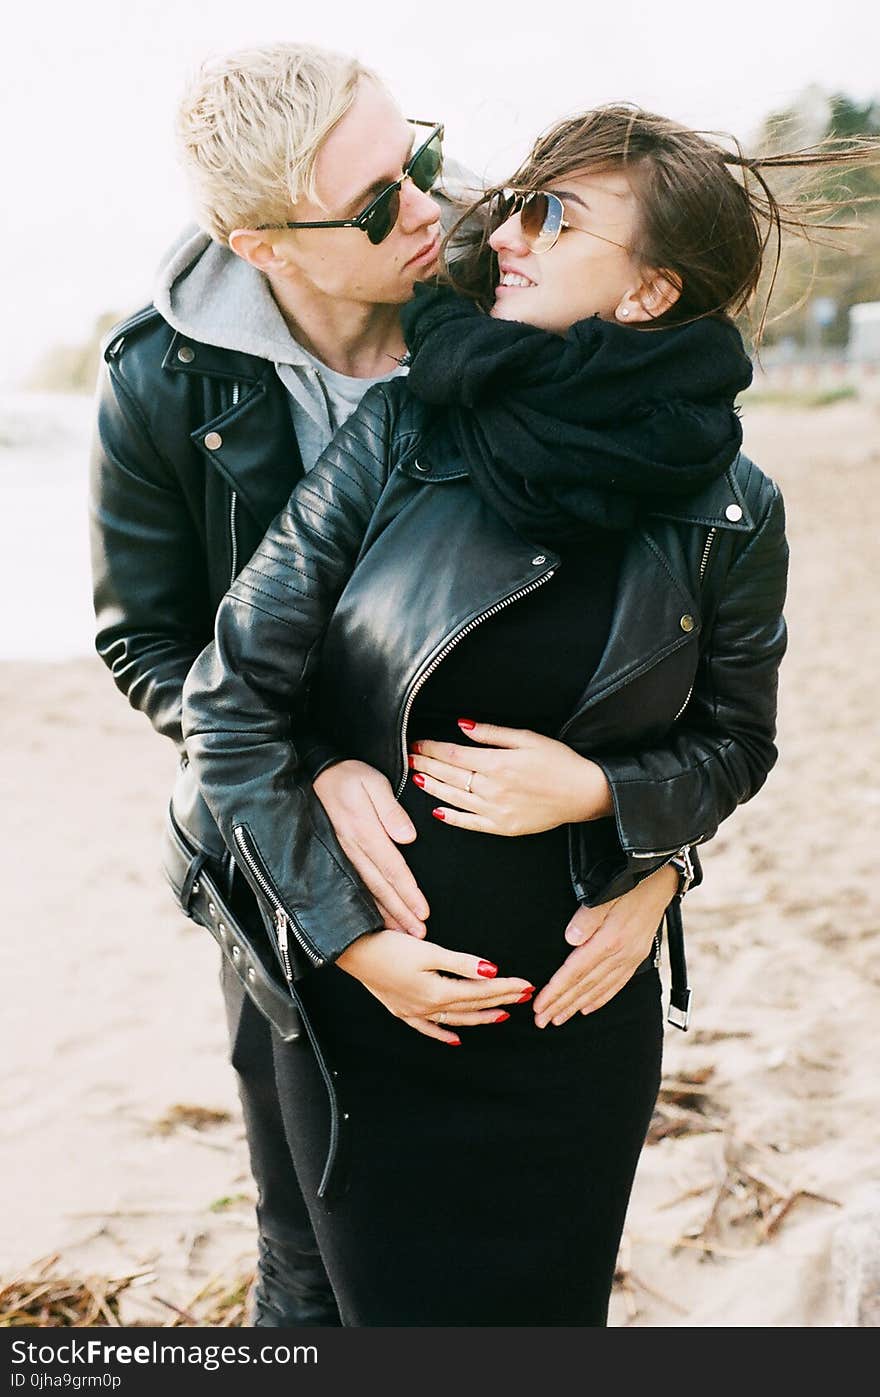 Man in Black Leather Zip Jacket Hugging Woman in Black Leather Zip Jacket and Black Pants Standing on Sand at Daytime